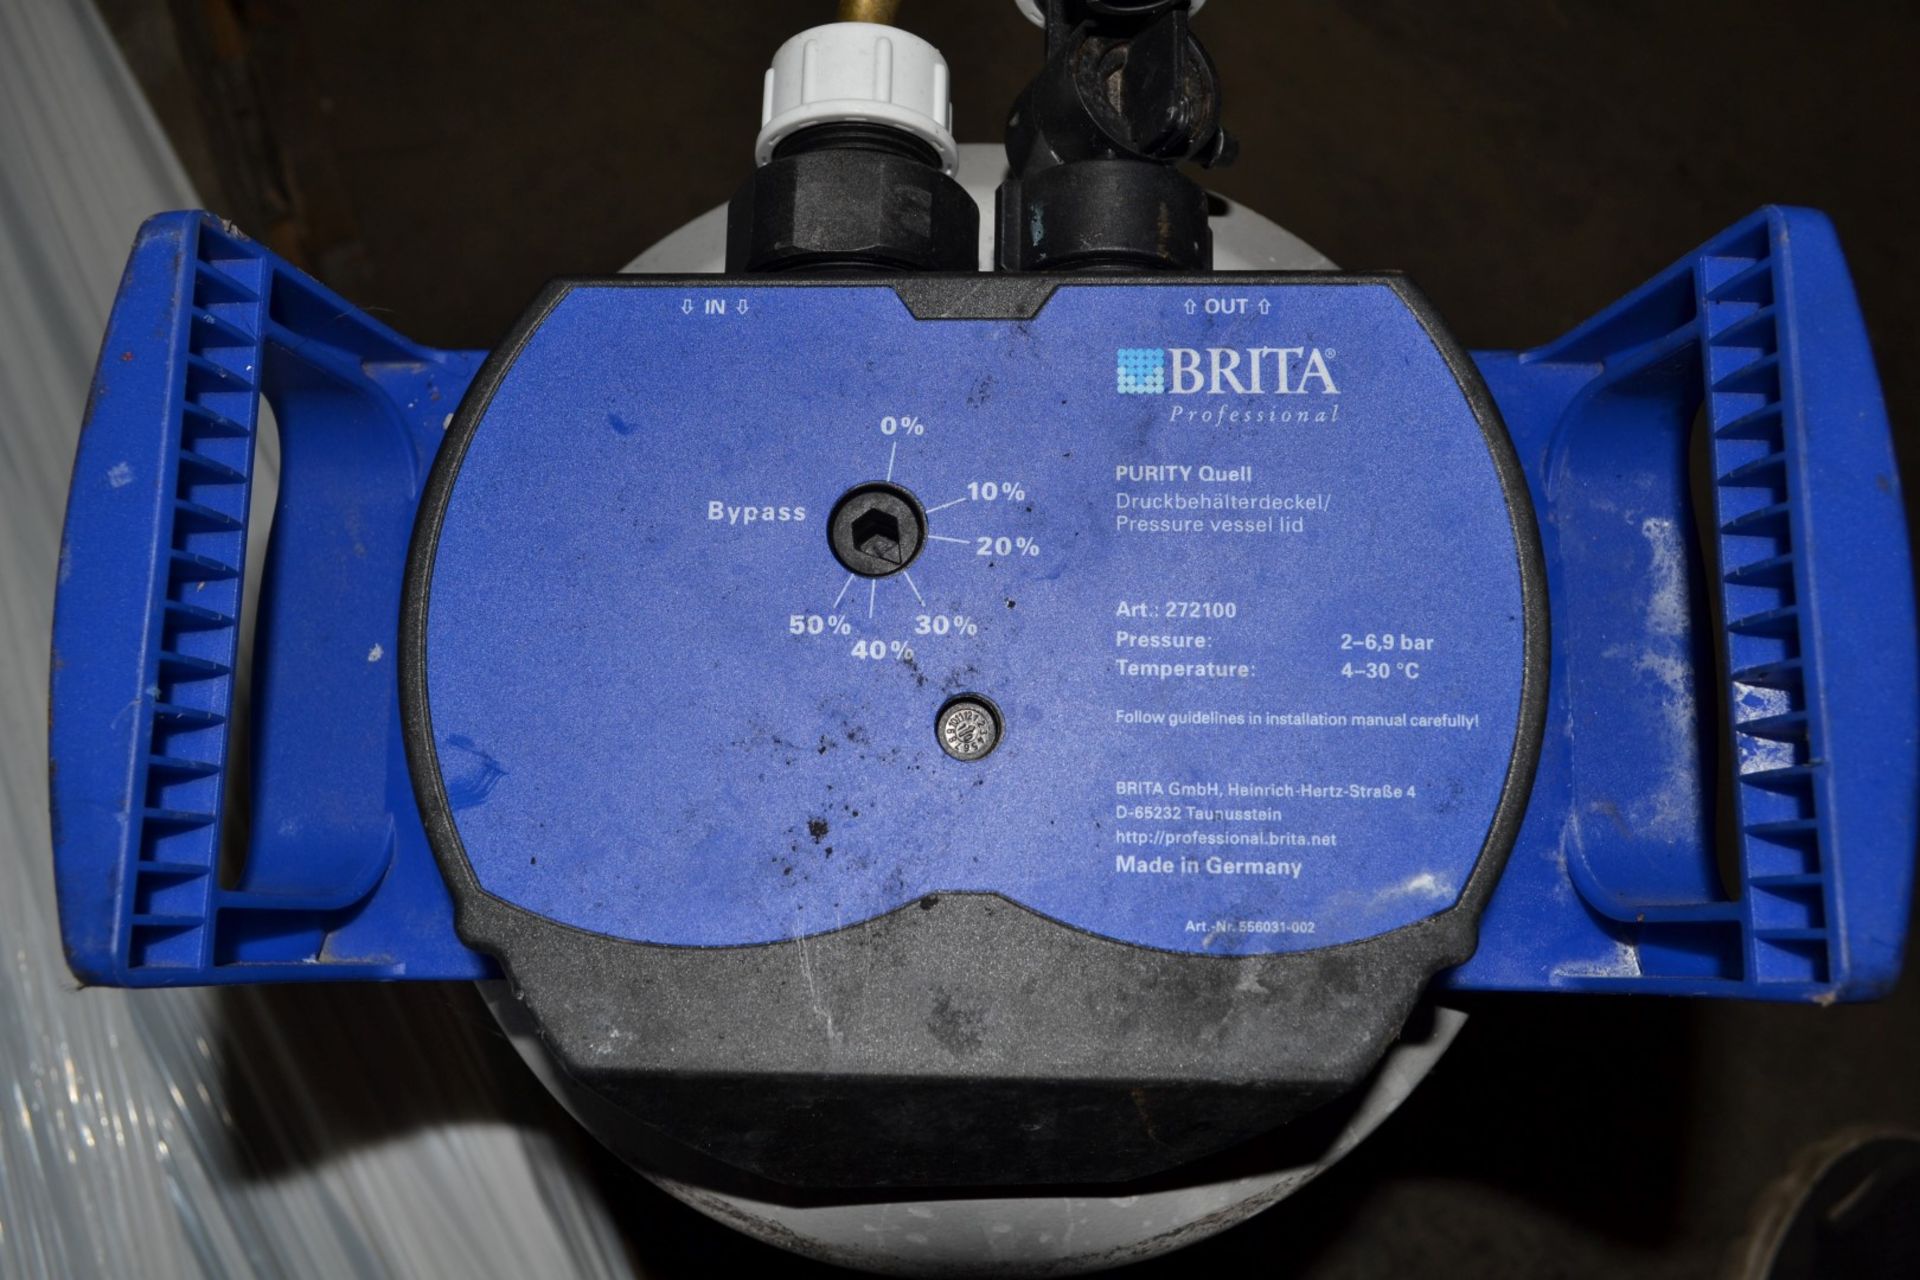 1 x Brita Professional Purity 600 Quell ST Filter - Ref: FJC007 - CL124 - Location: Bolton BL1 - - Image 3 of 7